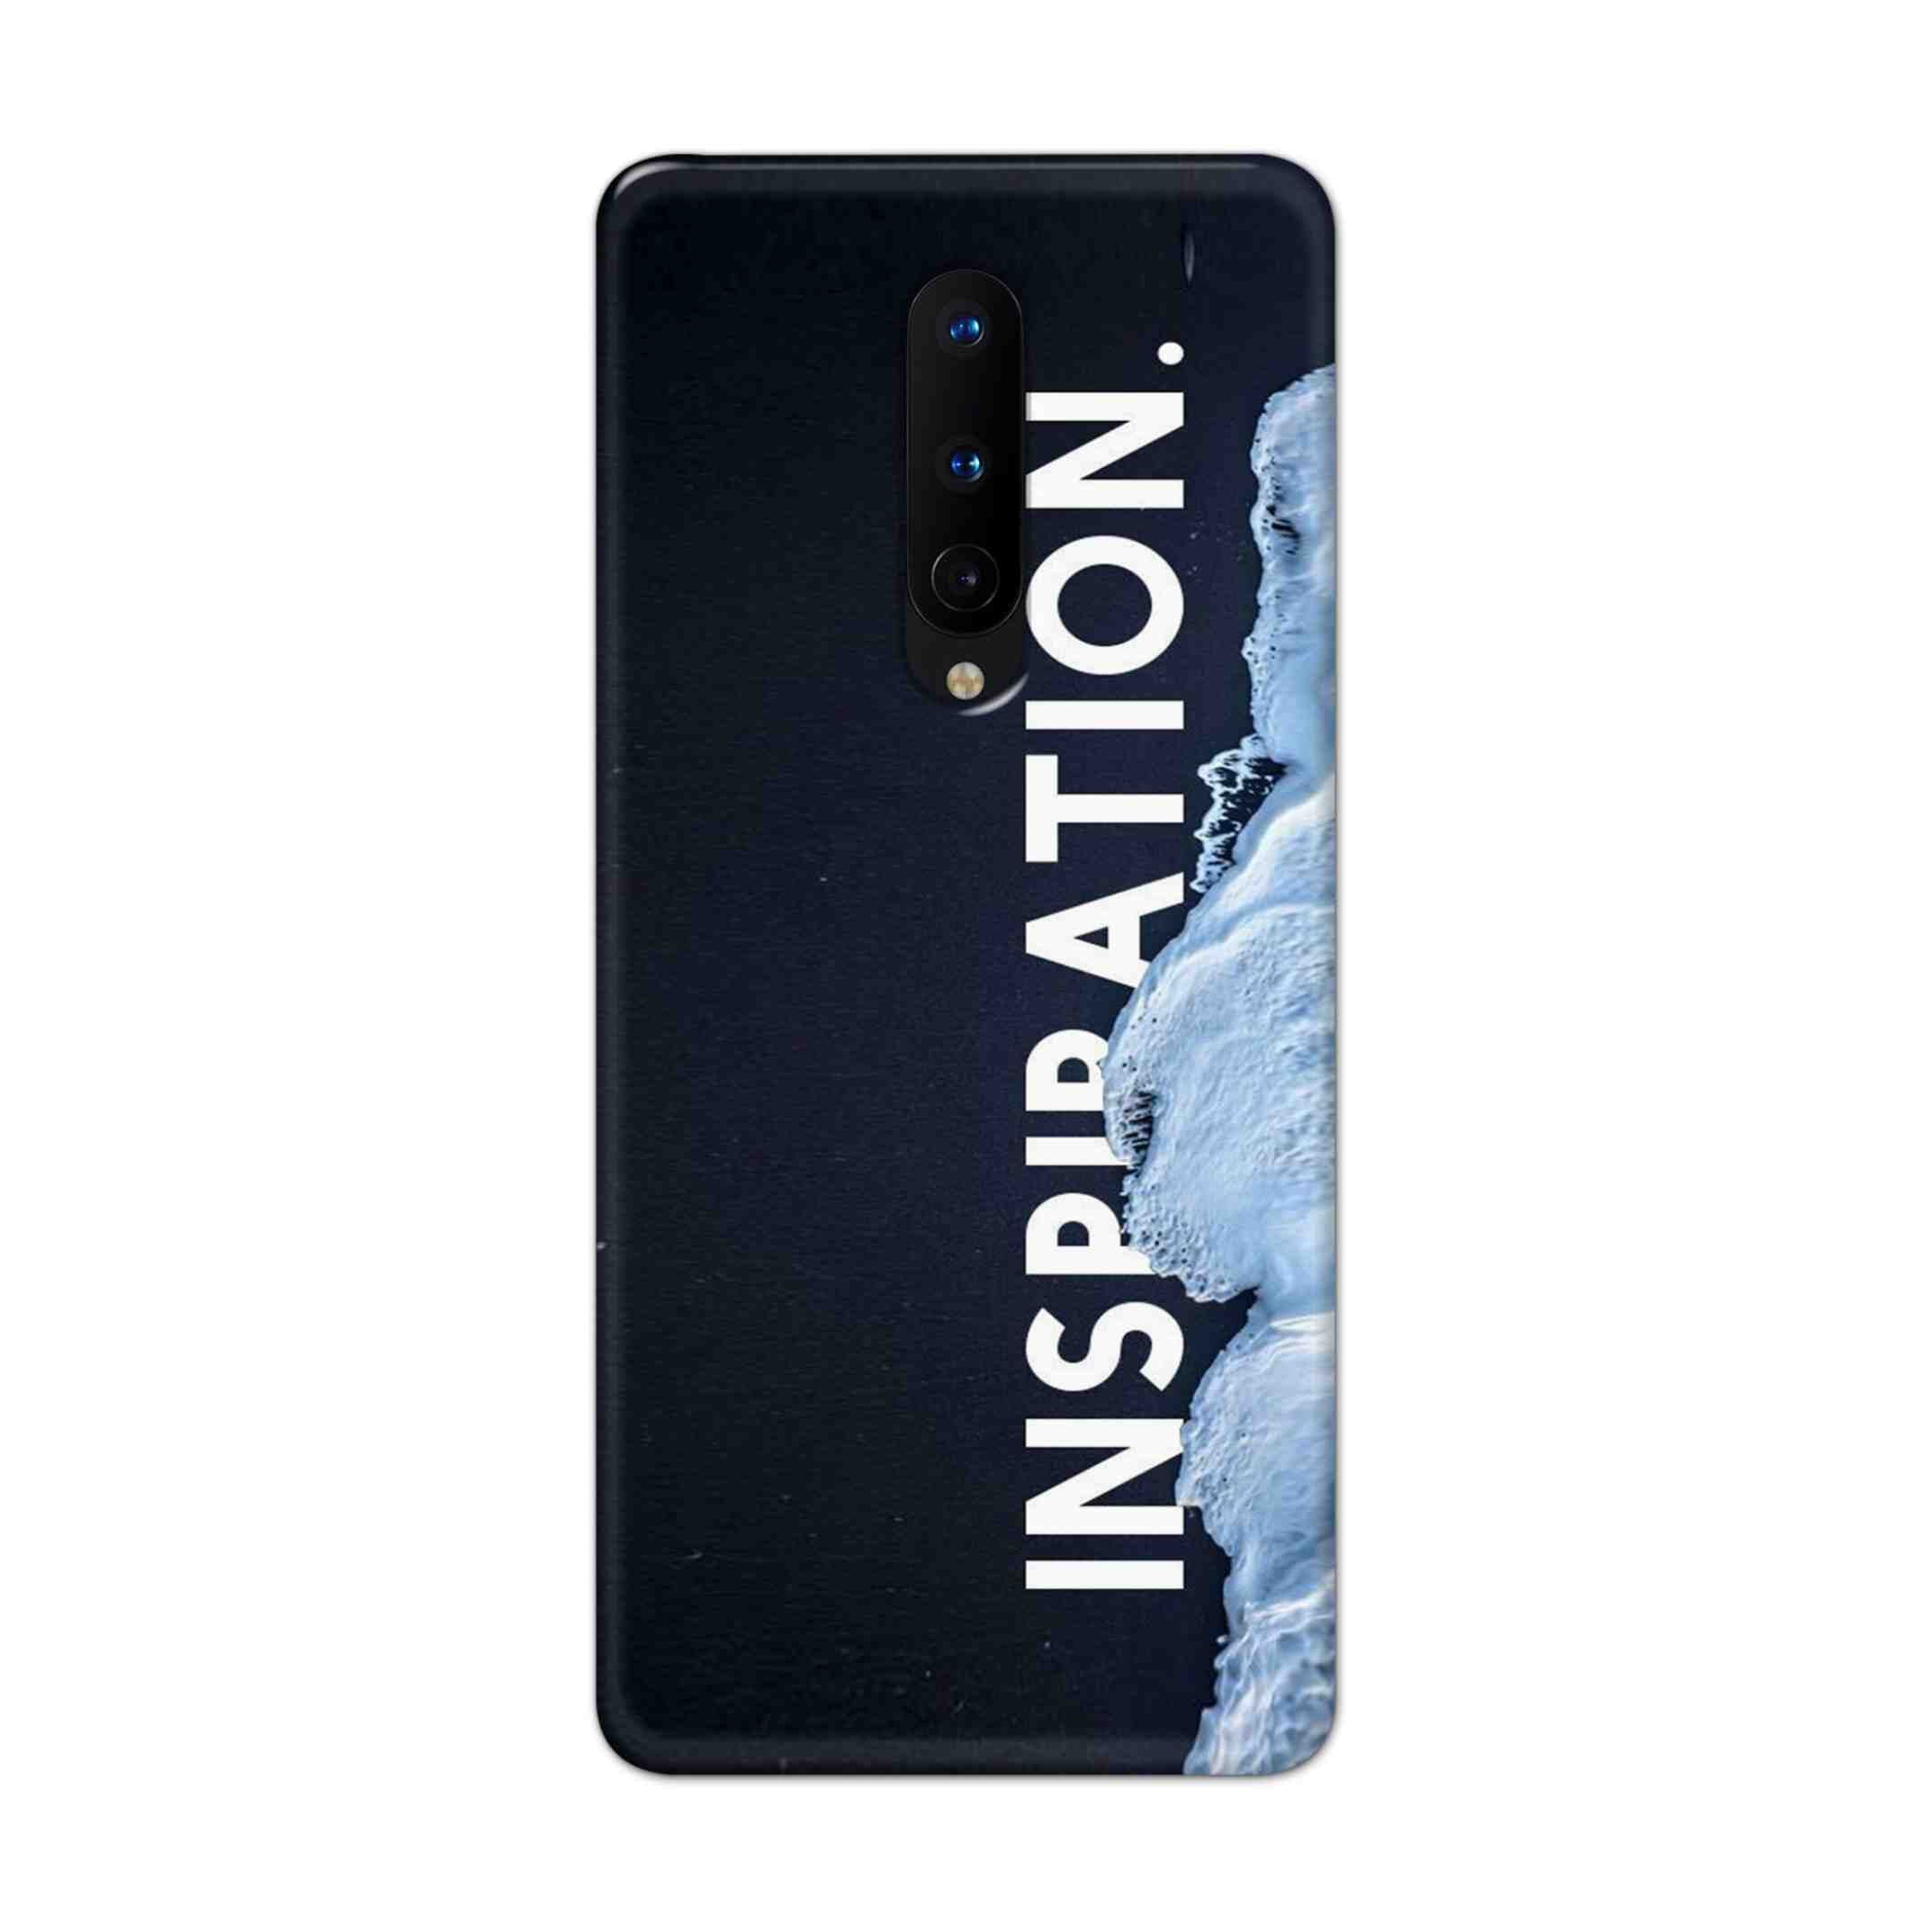 Buy Inspiration Hard Back Mobile Phone Case Cover For OnePlus 8 Online